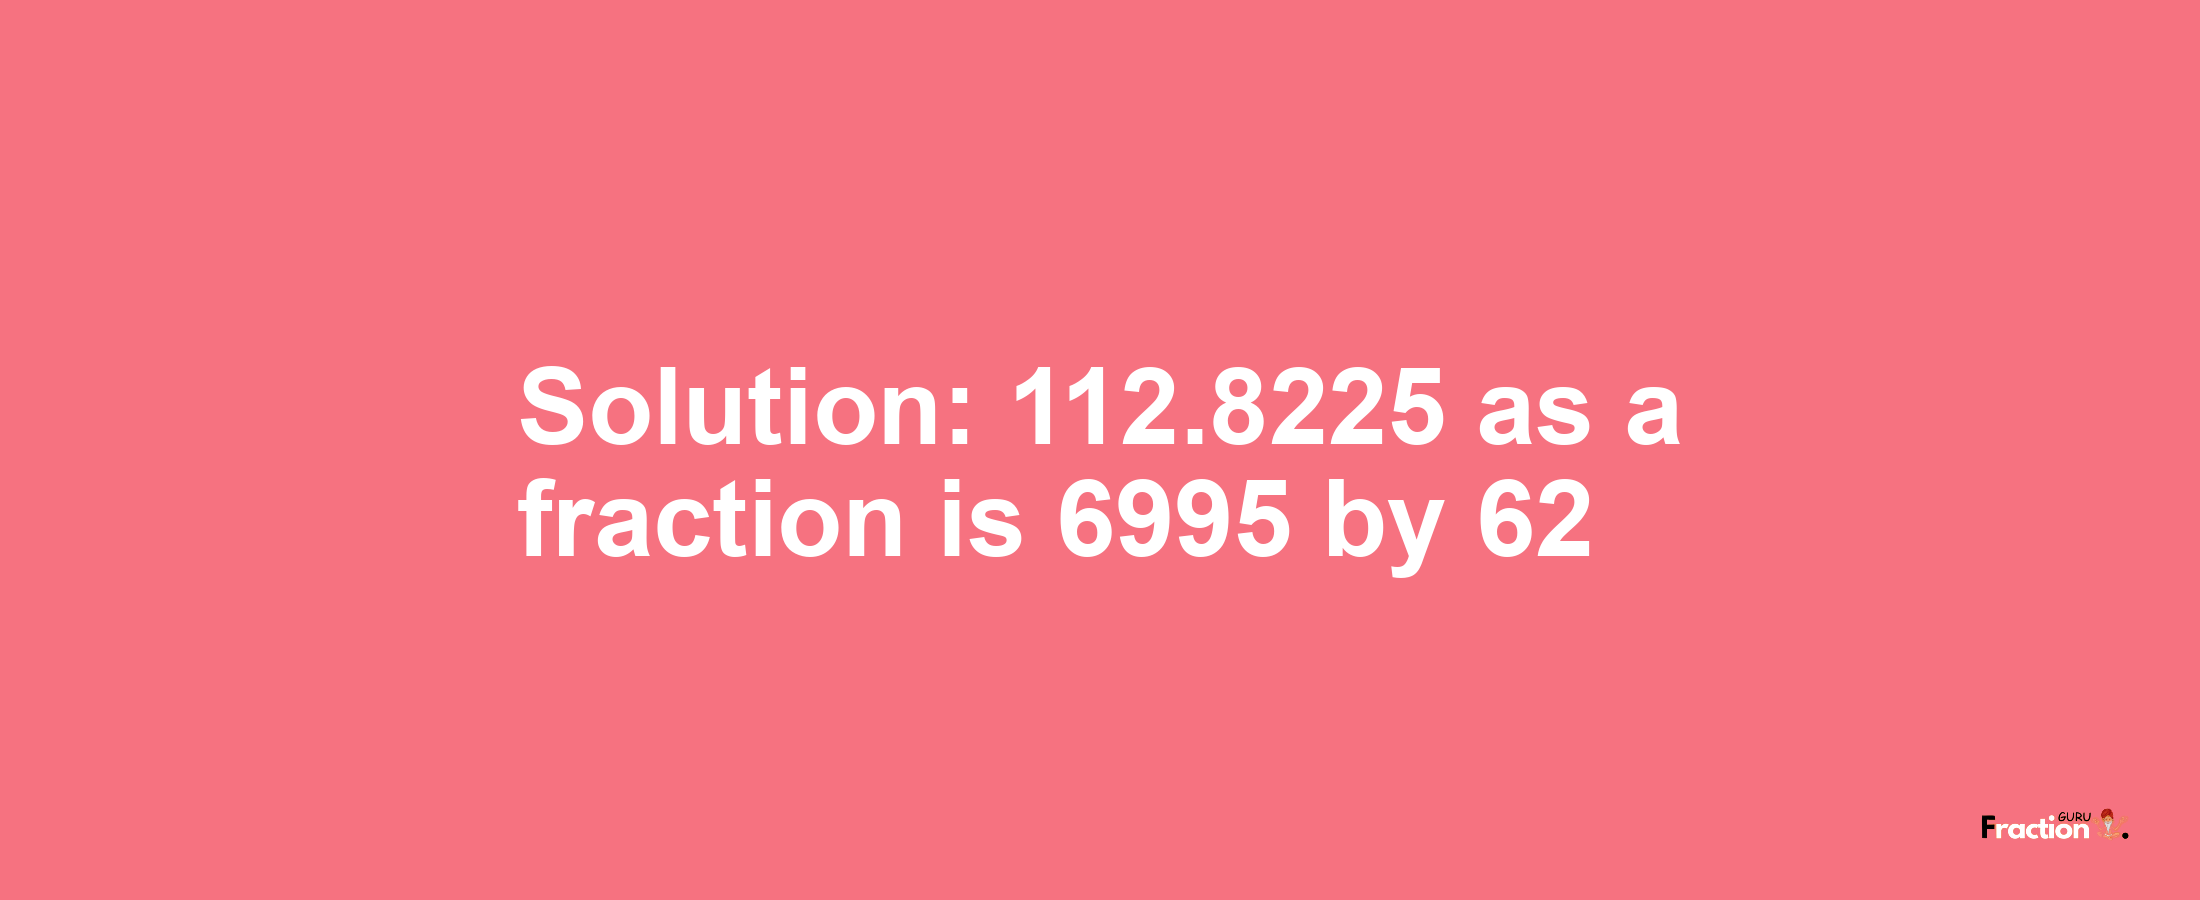 Solution:112.8225 as a fraction is 6995/62